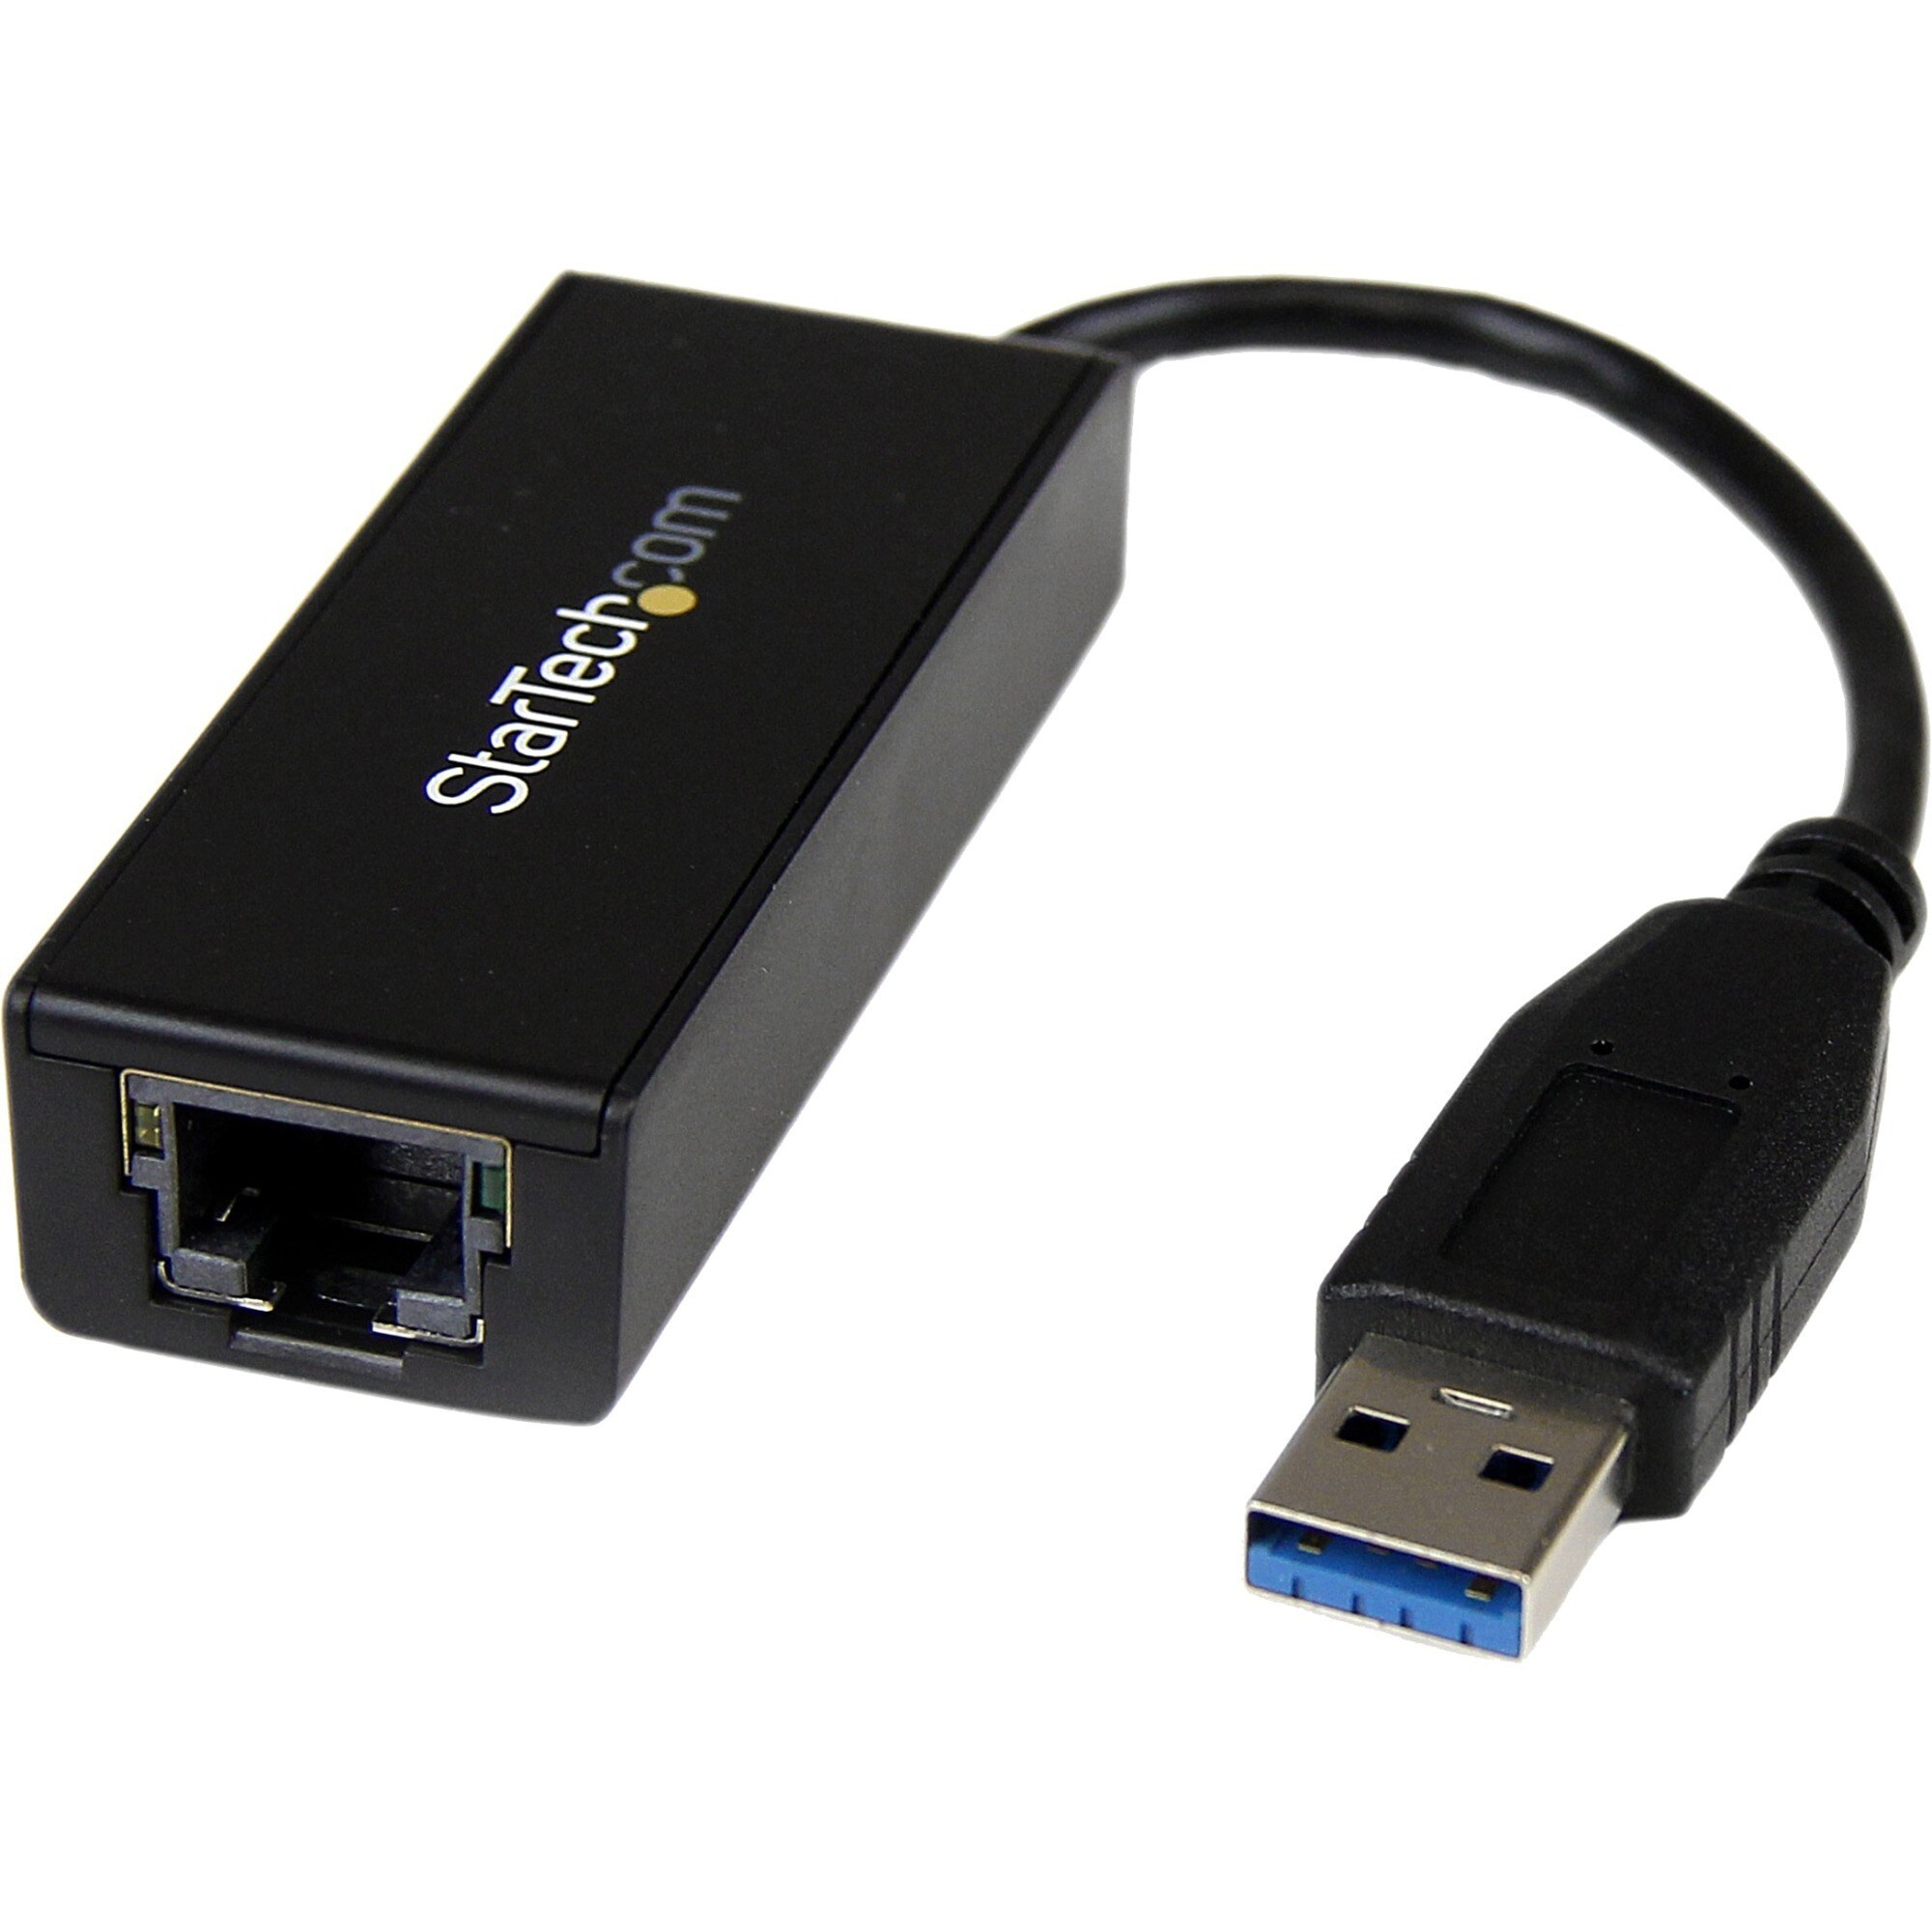 intek adapter usb to ethernet for mac